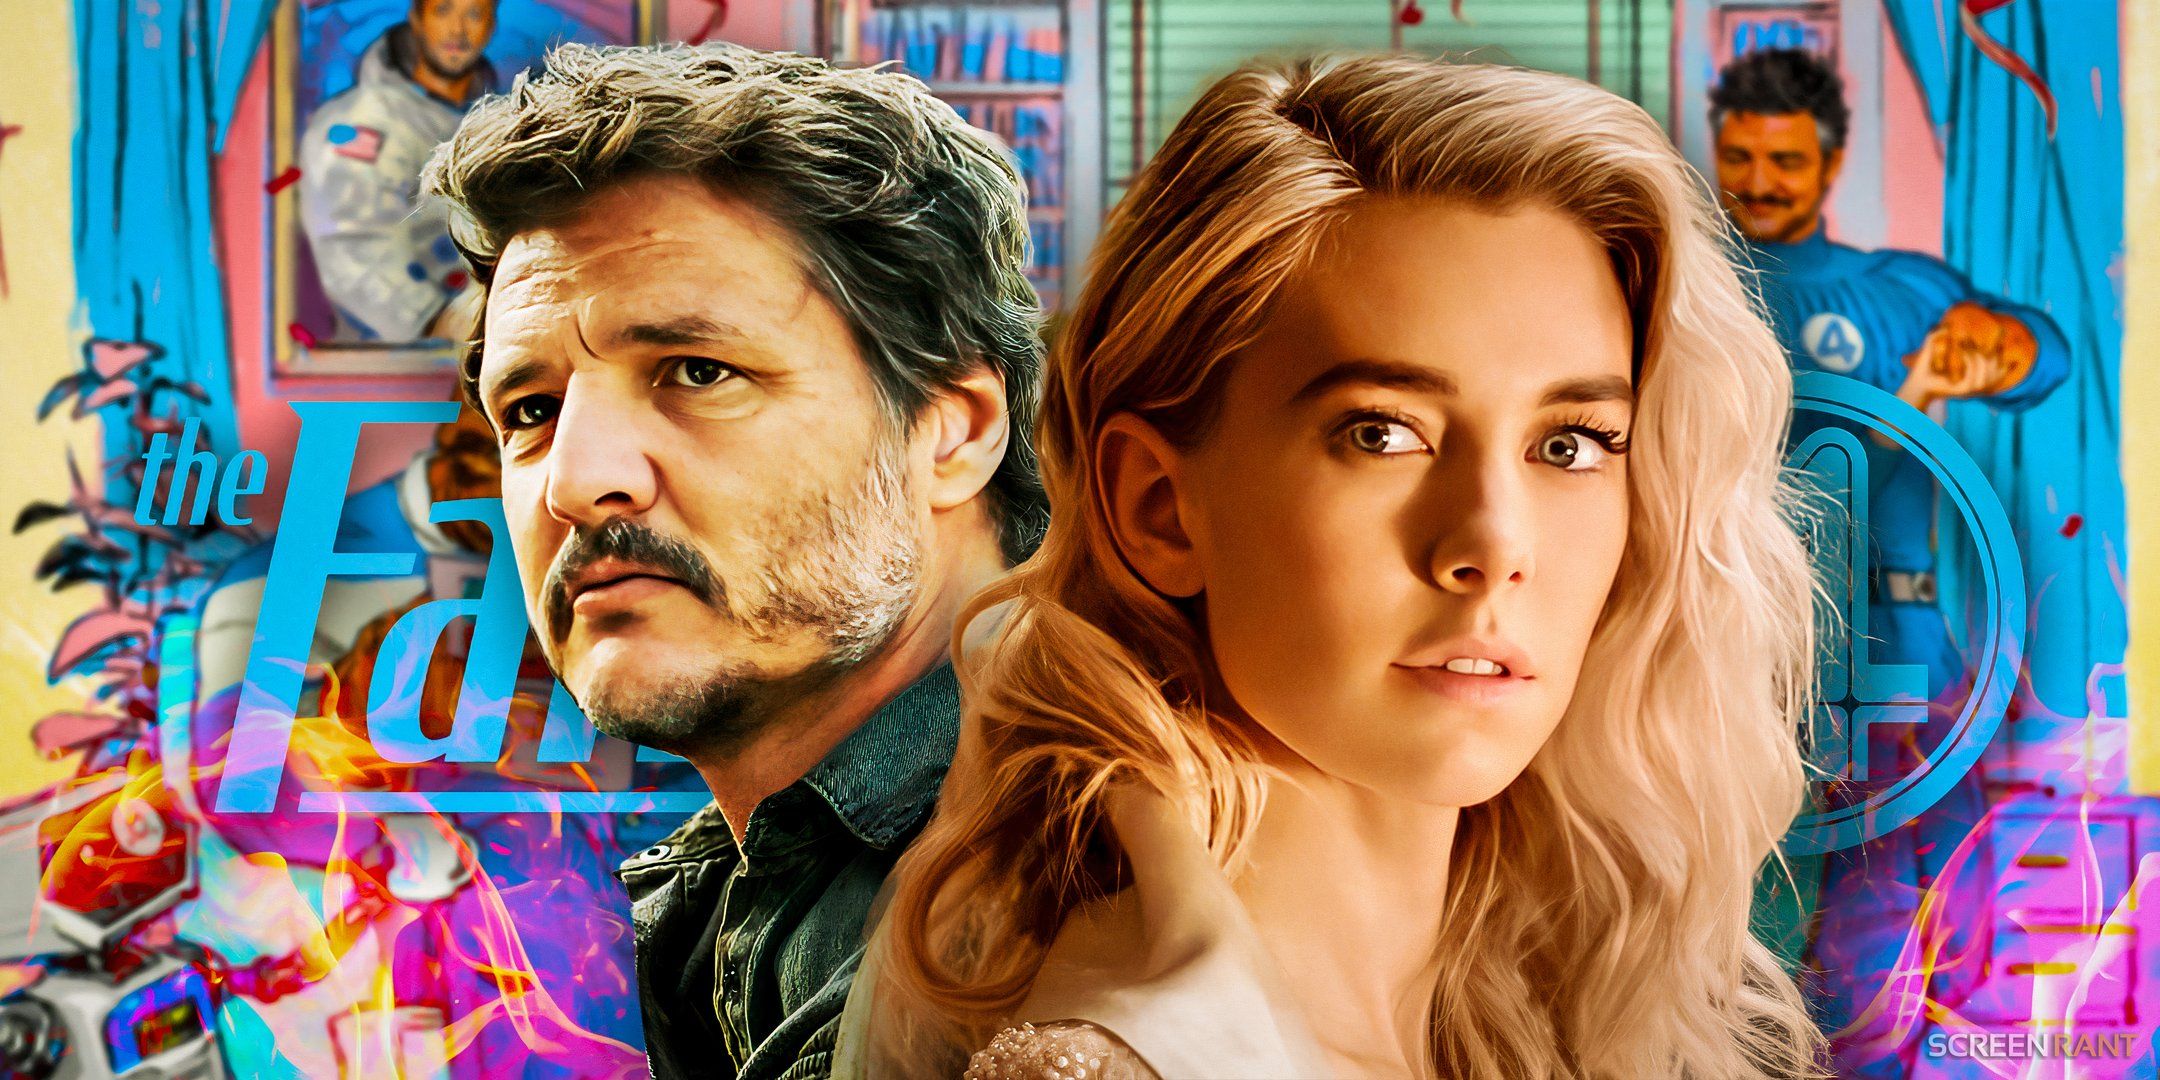 Pedro Pascal as Joel Miller from The Last of Us and Vanessa Kirby as The White Widow from Mission Impossible: Fallout in front of The Fantastic Four MCU logo and concept art